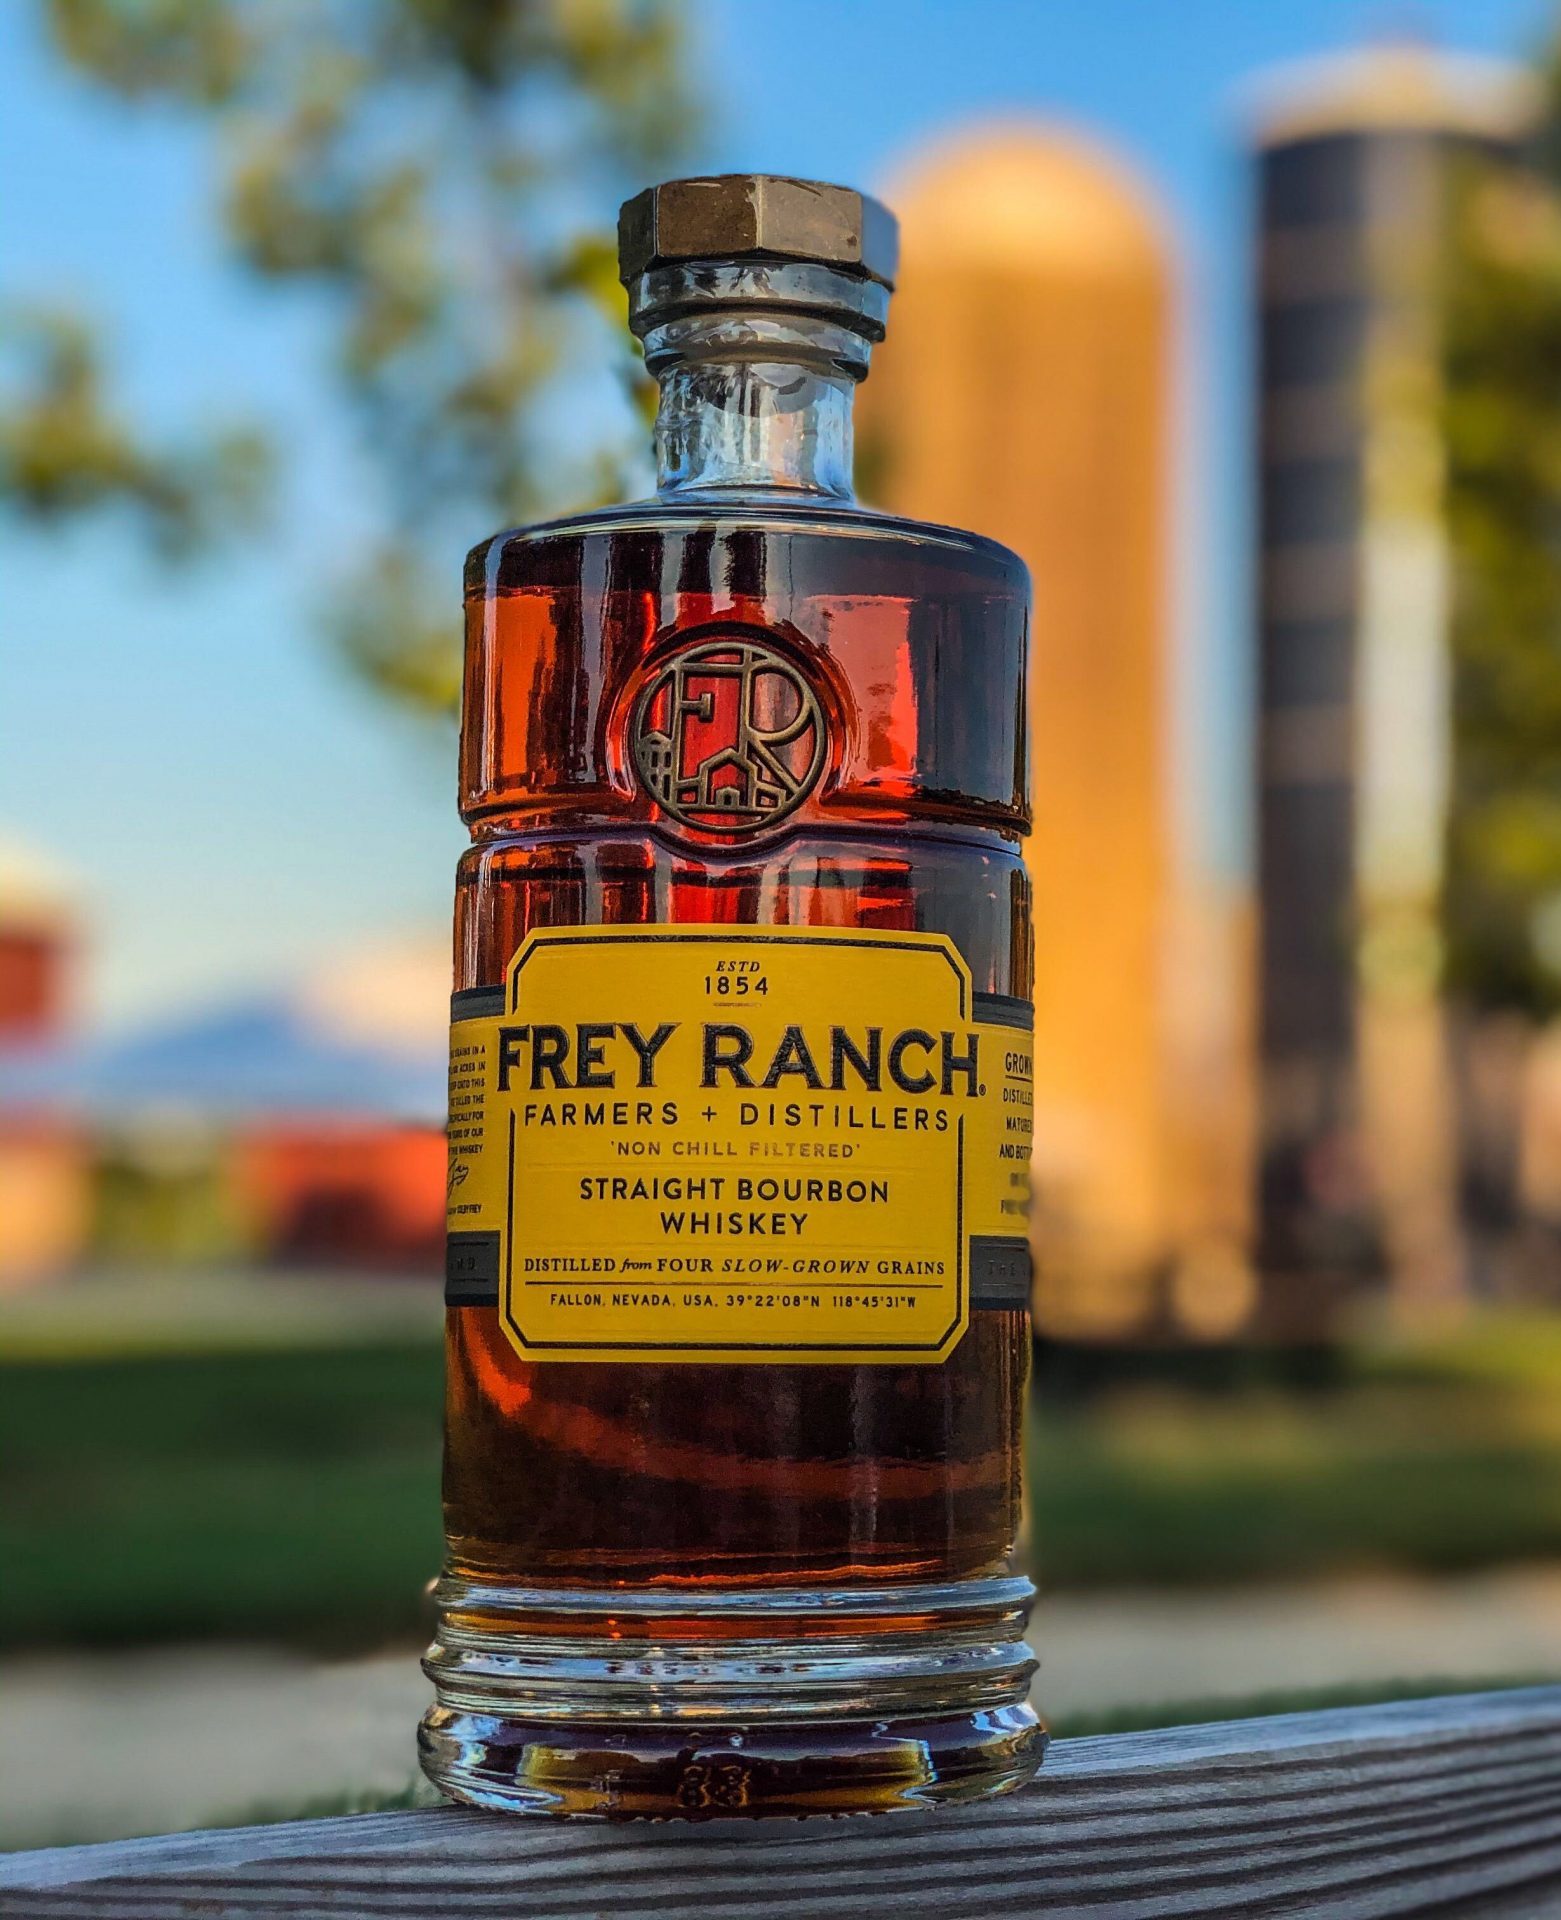 Lightning Review: Frey Ranch Straight Bourbon Whisky